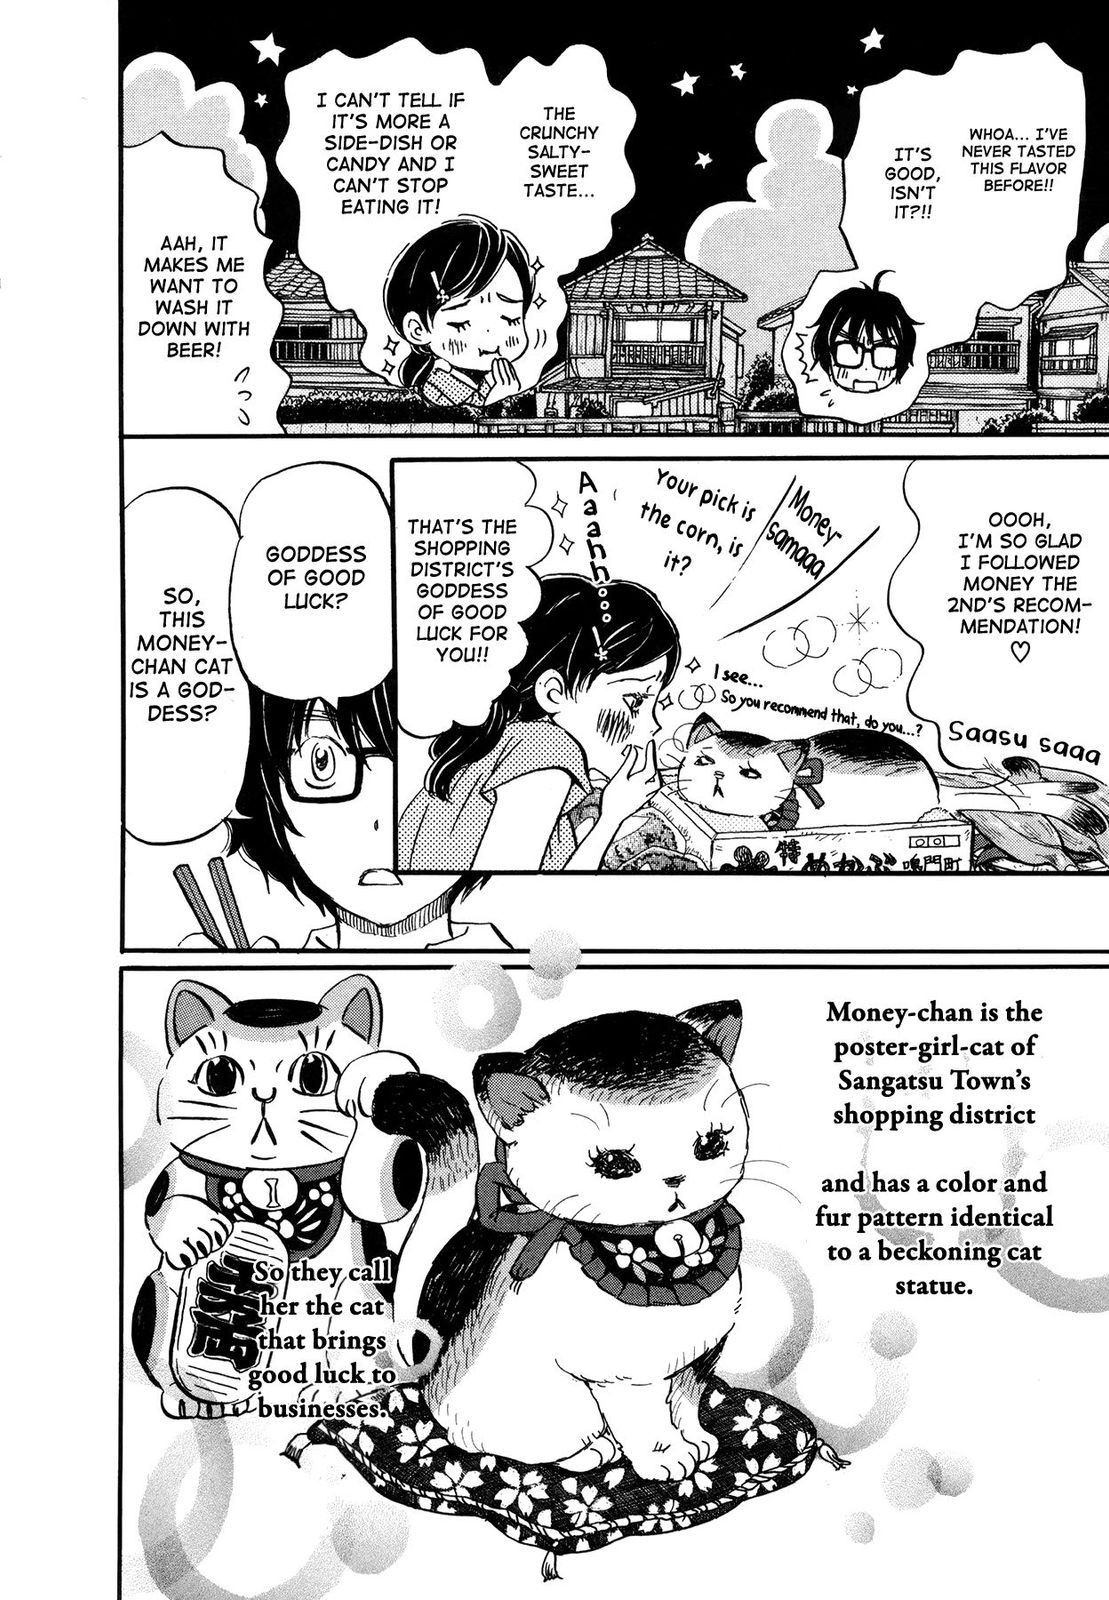 March Comes in Like a Lion, Chapter 140 Fluffy Treasure (EN) image 15